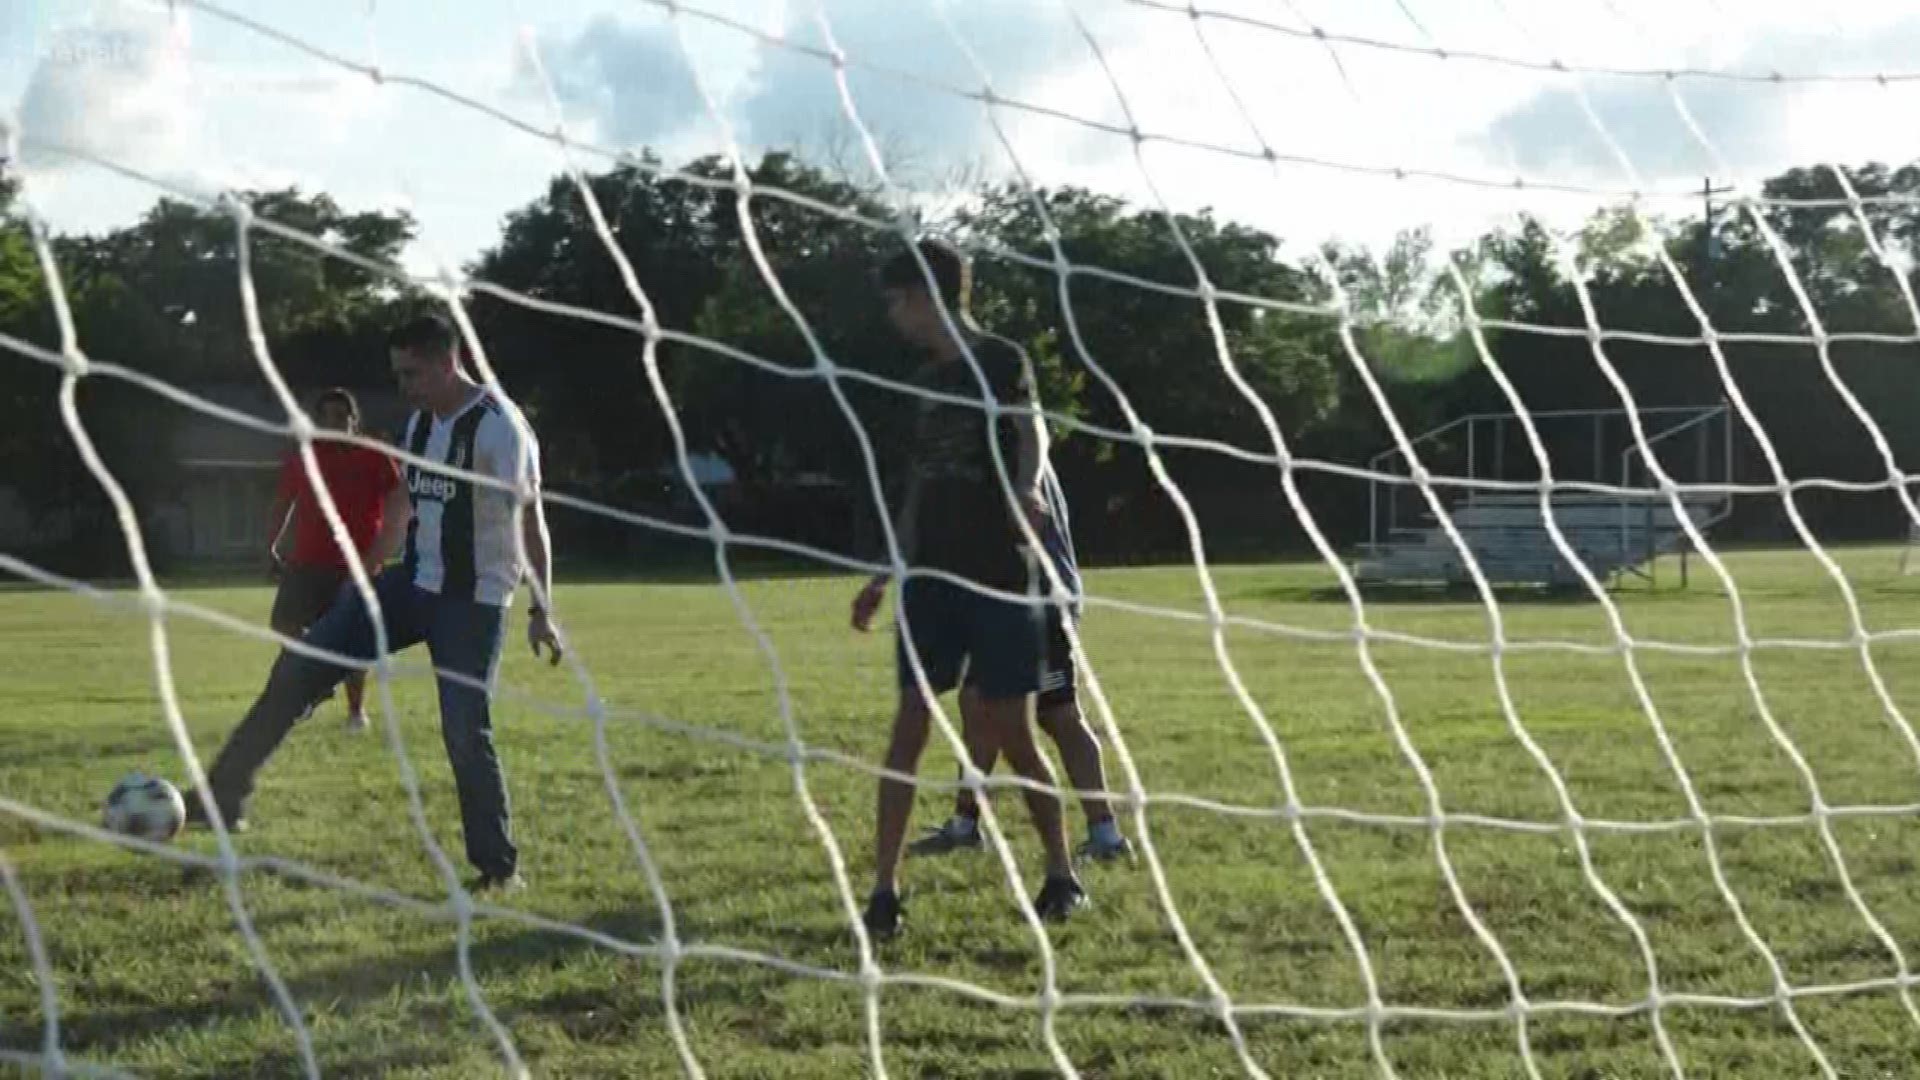 Local man brings soccer goal idea to the city council and scores for the entire city.